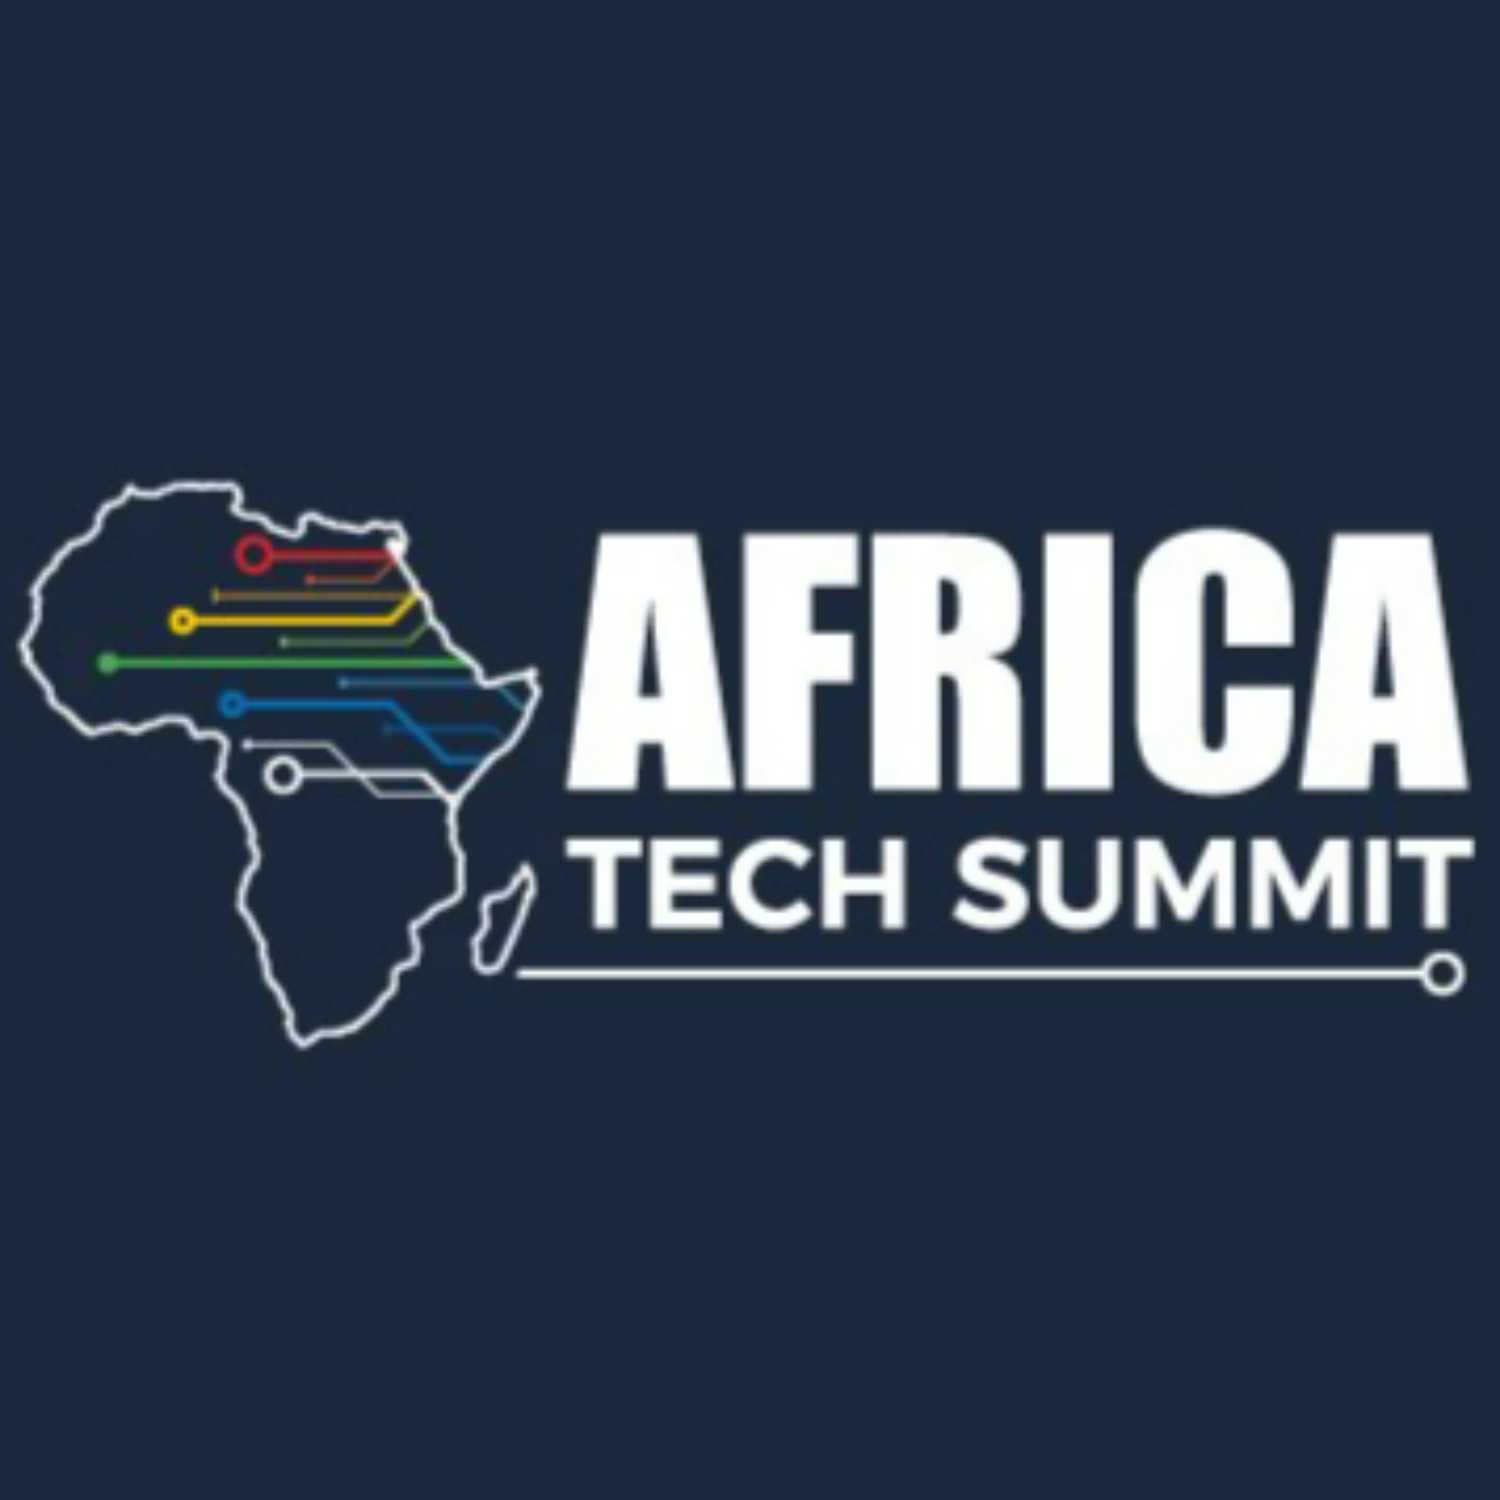 EP11: Twitter in Africa - empowering free speech and combating misinformation across the continent